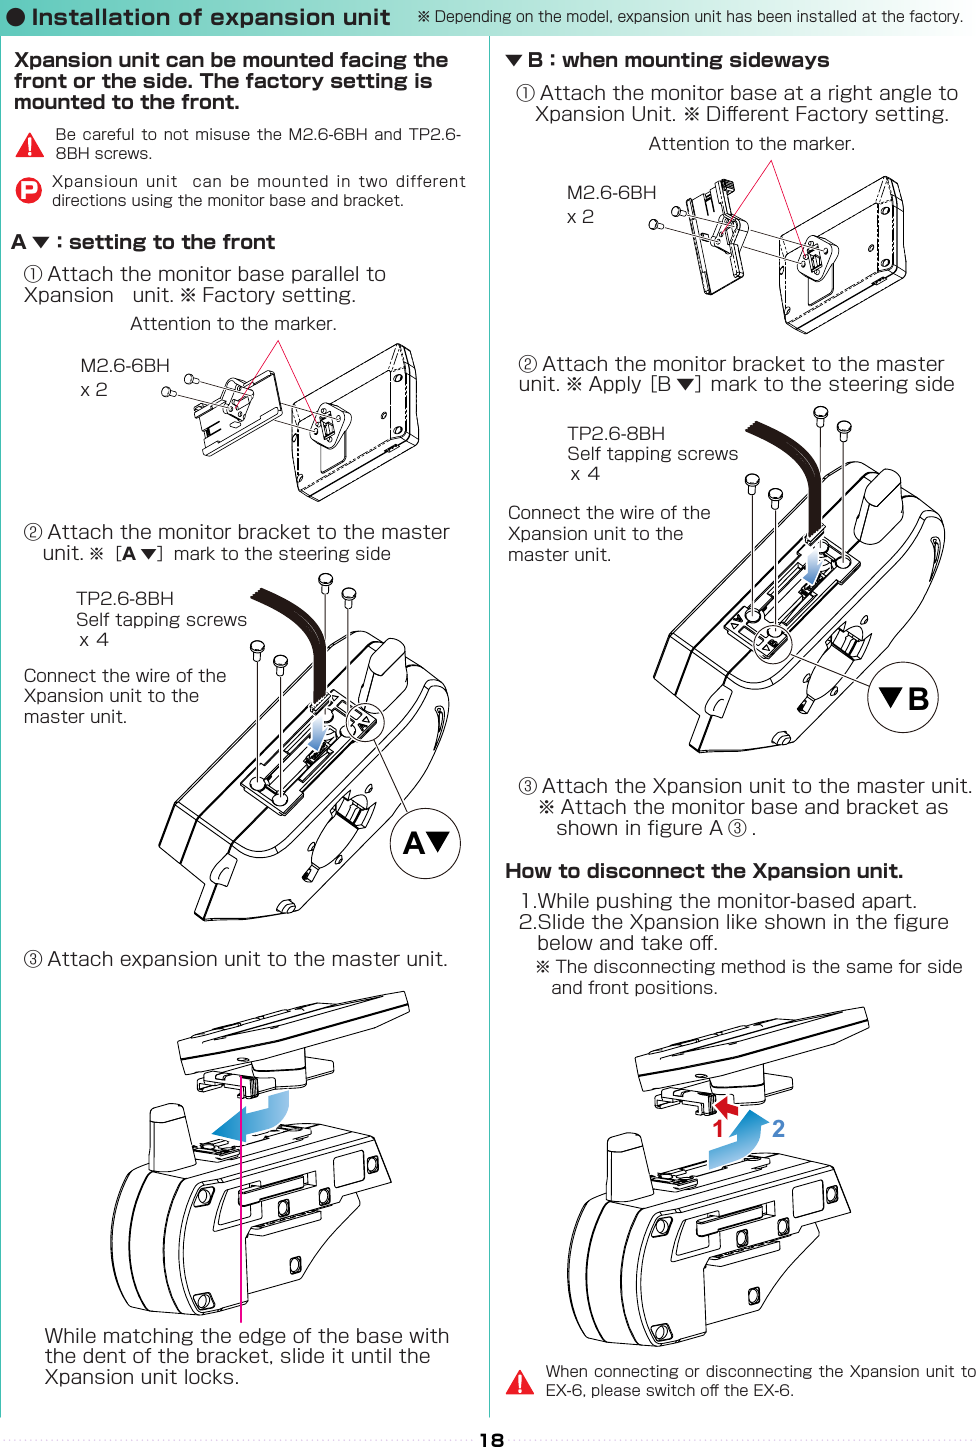 AB18② Attach the monitor bracket to the master 　unit. ※［A▼］mark to the steering side② Attach the monitor bracket to the master 　unit. ※ Apply ［B ▼］ mark to the steering side① Attach the monitor base parallel to Xpansion　unit. ※ Factory setting.※ The disconnecting method is the same for side 　and front positions.① Attach the monitor base at a right angle to 　Xpansion Unit. ※ Di󰮏erent Factory setting.Attention to the marker.Attention to the marker.M2.6-6BHM2.6-6BHx 2x 2x ４x ４TP2.6-8BHSelf tapping screwsTP2.6-8BHSelf tapping screwsConnect the wire of the Xpansion unit to the master unit.Connect the wire of the Xpansion unit to the master unit.③ Attach expansion unit to the master unit.③ Attach the Xpansion unit to the master unit.　※ Attach the monitor base and bracket as 　　　shown in gure A ③ .1.While pushing the monitor-based apart.2.Slide the Xpansion like shown in the gure 　　below and take o󰮏.While matching the edge of the base with the dent of the bracket, slide it until the Xpansion unit locks.A ▼：setting to the frontXpansion unit can be mounted facing the front or the side. The factory setting is mounted to the front.▼ B：when mounting sidewaysHow to disconnect the Xpansion unit.When connecting or  disconnecting the Xpansion unit to EX-6, please switch o󰮏 the EX-6.Be careful  to not  misuse  the  M2.6-6BH  and  TP2.6-8BH screws.Xpansioun  unit    can  be  mounted  in  two  different directions using the monitor base and bracket.P● Installation of expansion unit1  2※Depending on the model, expansion unit has been installed at the factory.